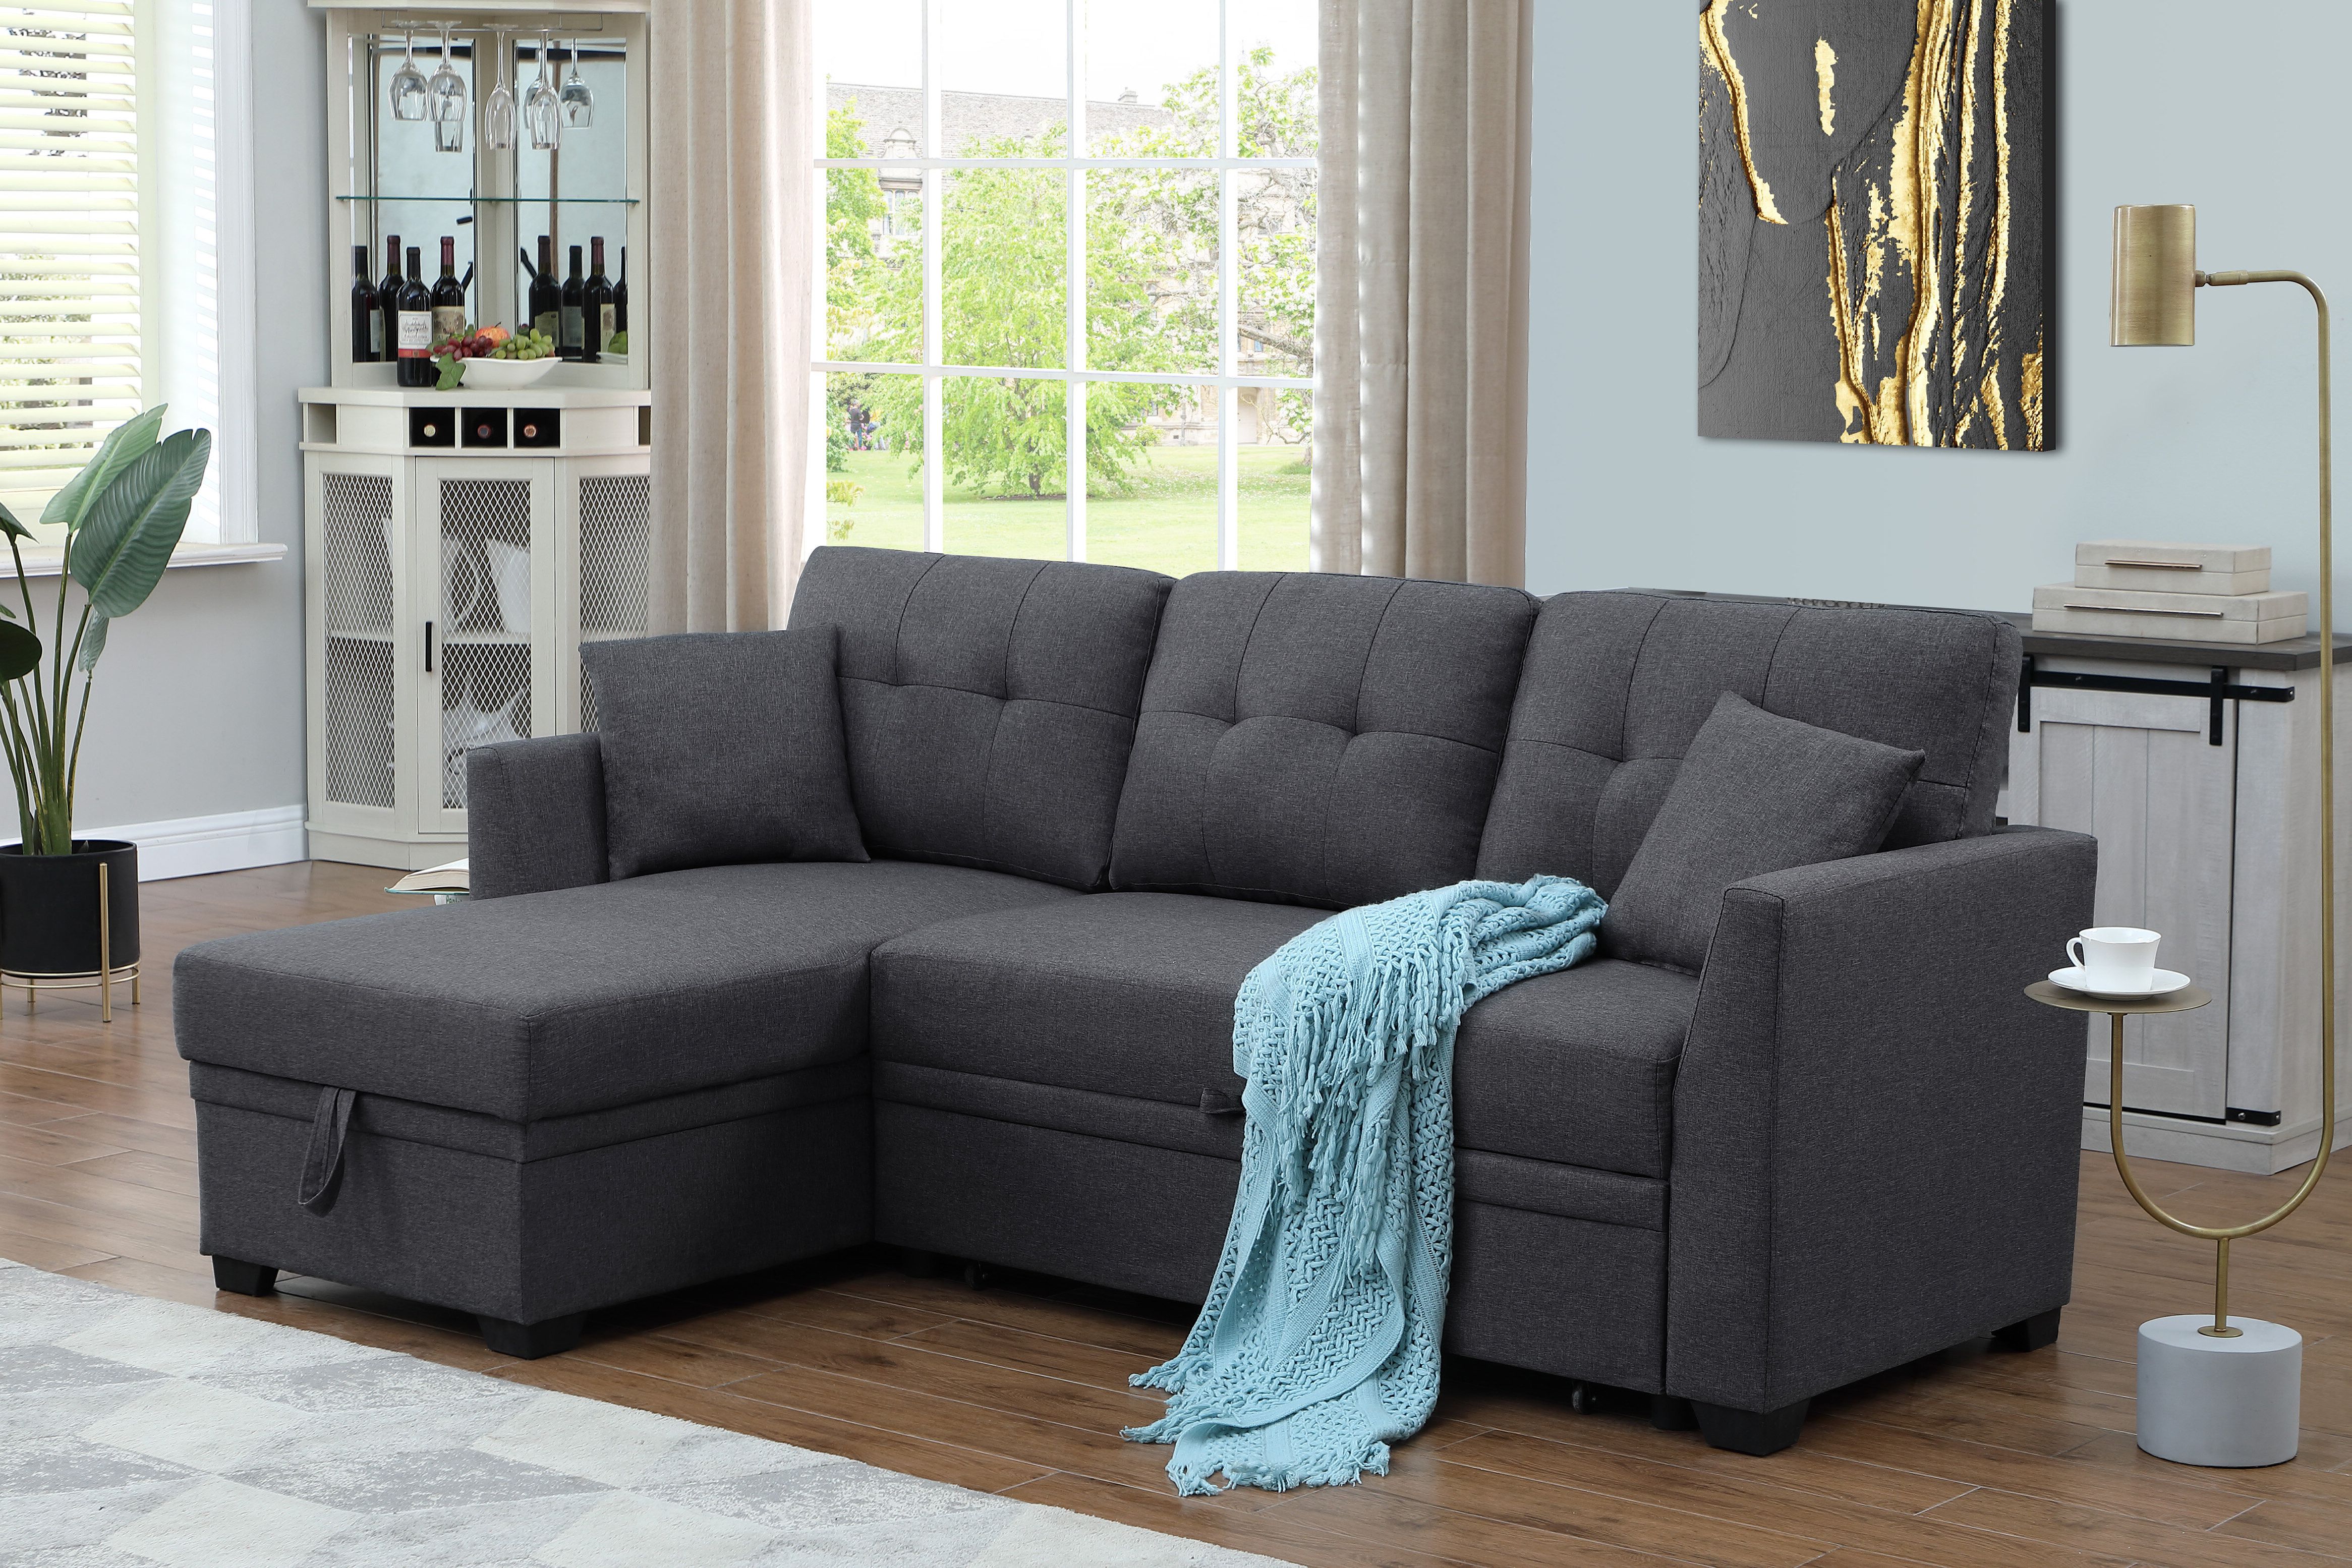 Latitude Run® Convertible Sleeper Sofa & Chaise & Reviews | Wayfair Intended For Convertible Sofas With Matching Chaise (Gallery 1 of 20)